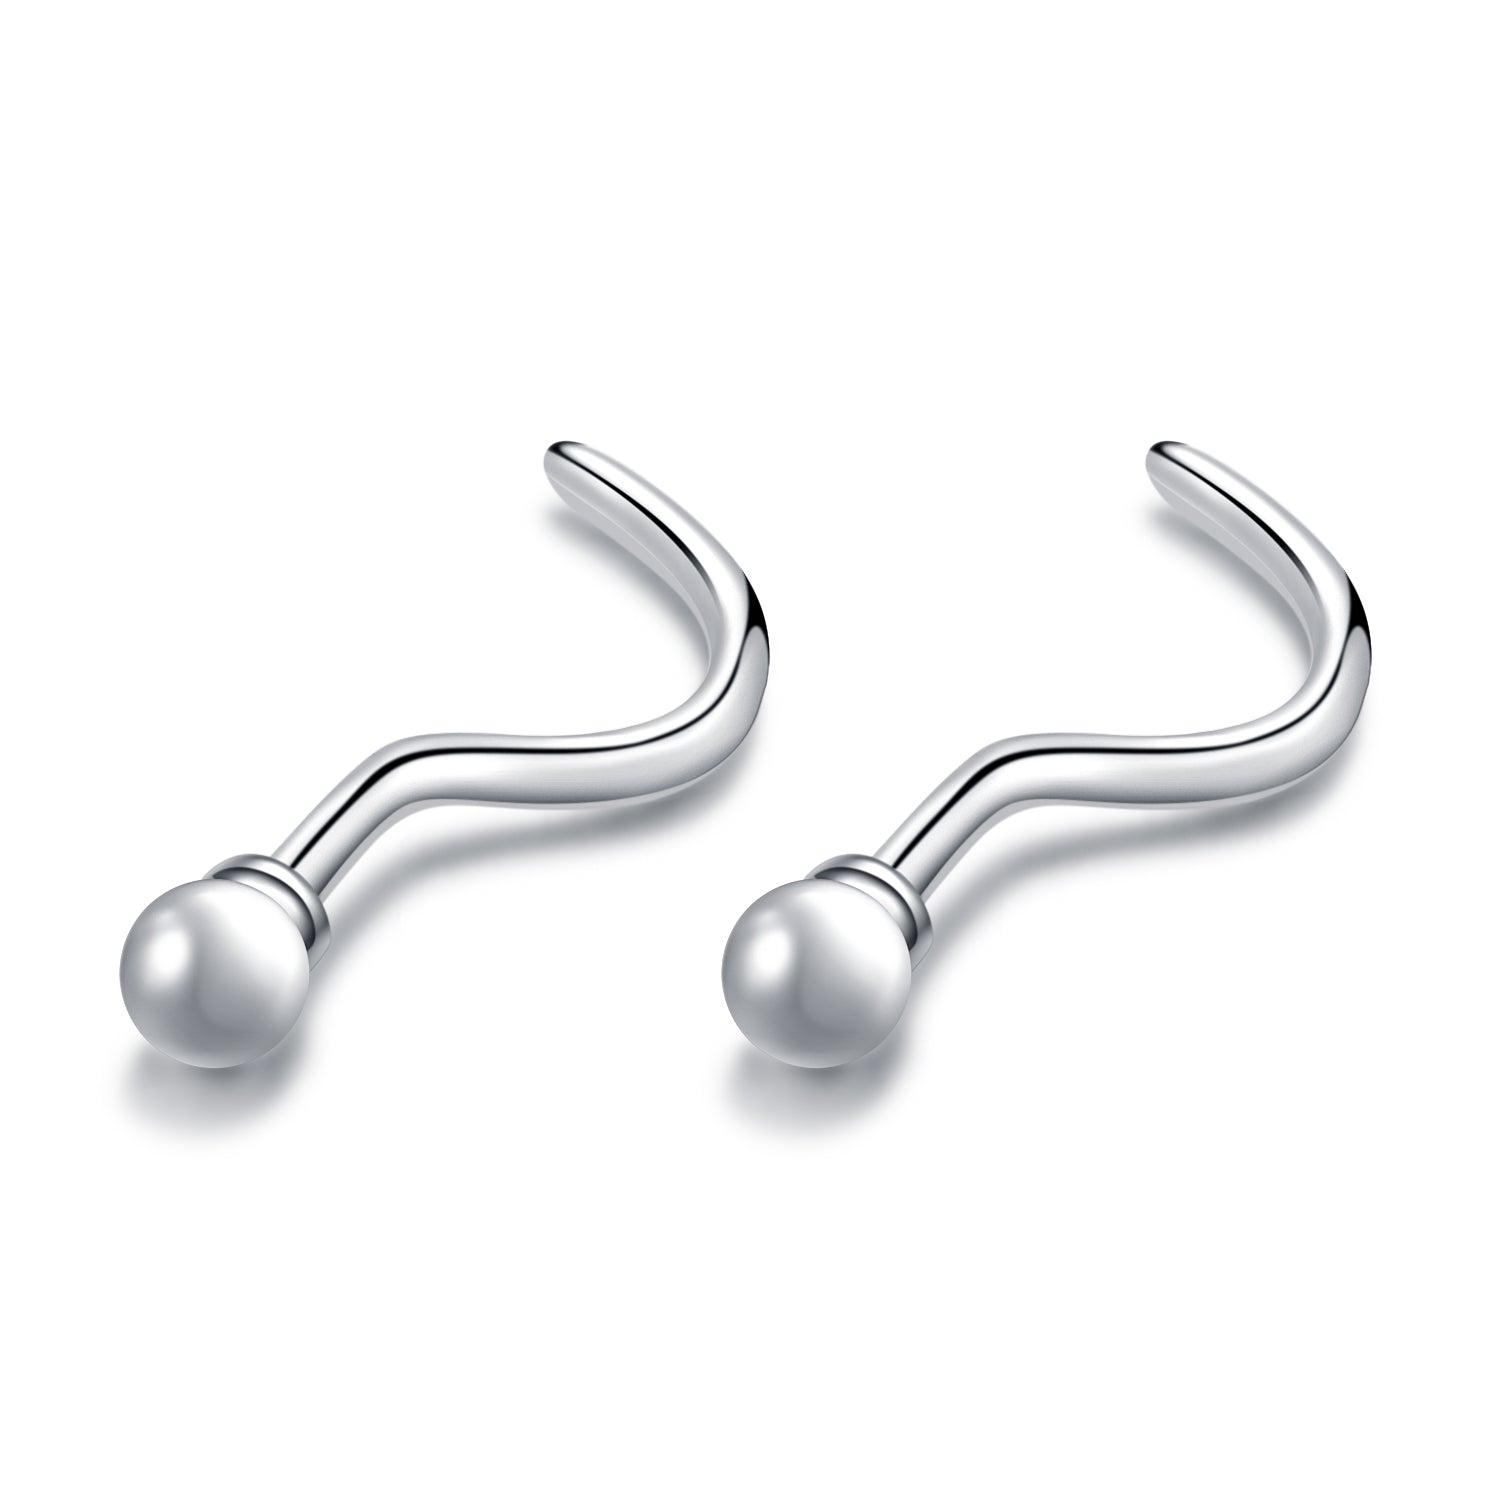 Spherical Nose Ring Silver Ball Simple Nose Ring Design Fashionable